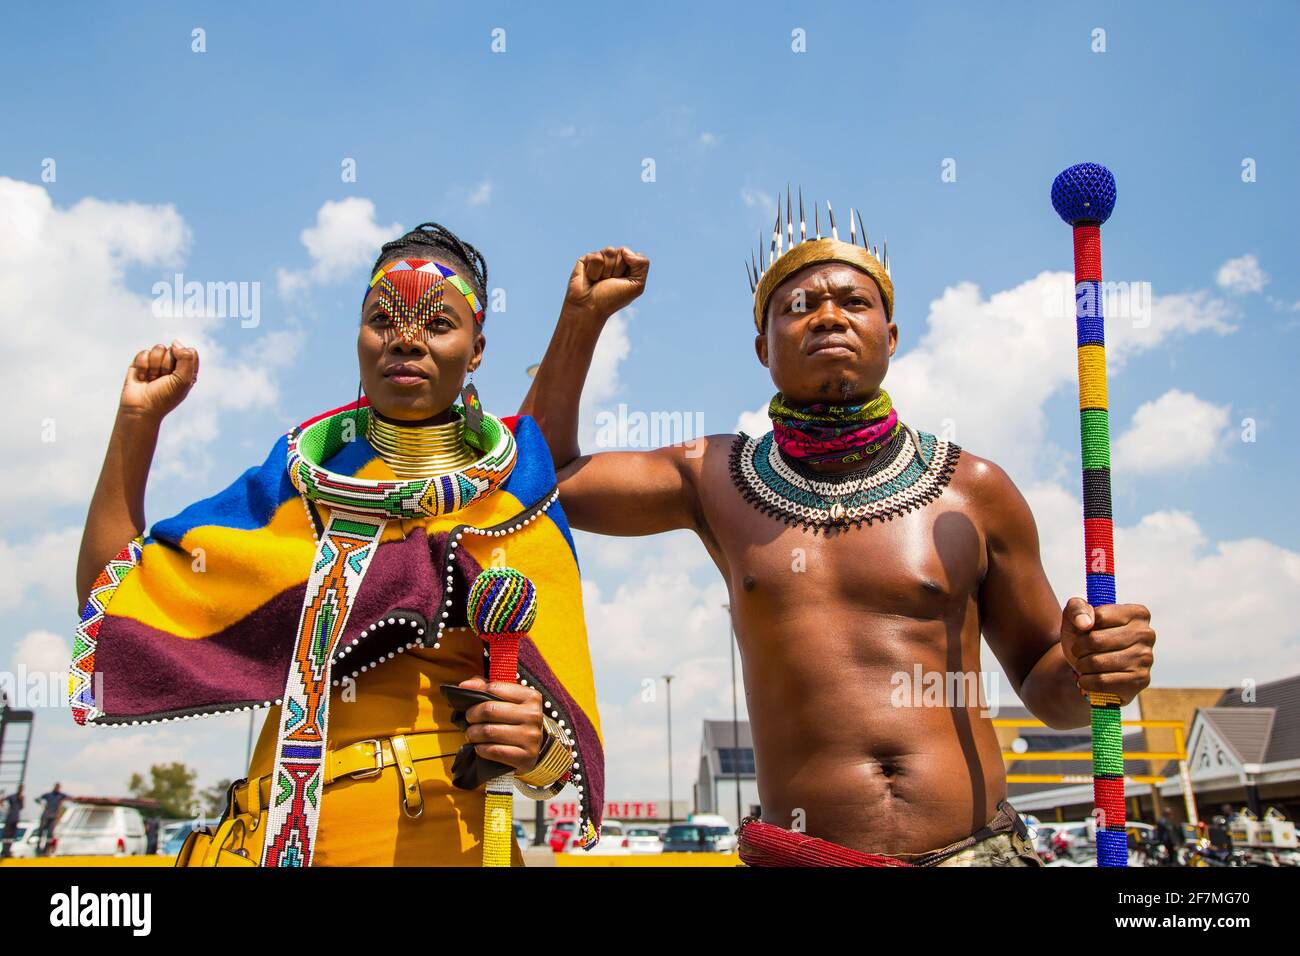 Johannesburg, South Africa. 08th Apr, 2021. Activist Nqobile Maluku (L) and Thando Mahlangu (R) wearing traditional attire raise their fists during a protest outside the Boulders Shopping Centre, after a store manager asked a man to leave for being dressed in the traditional Ndebele attire. Credit: SOPA Images Limited/Alamy Live News Stock Photo